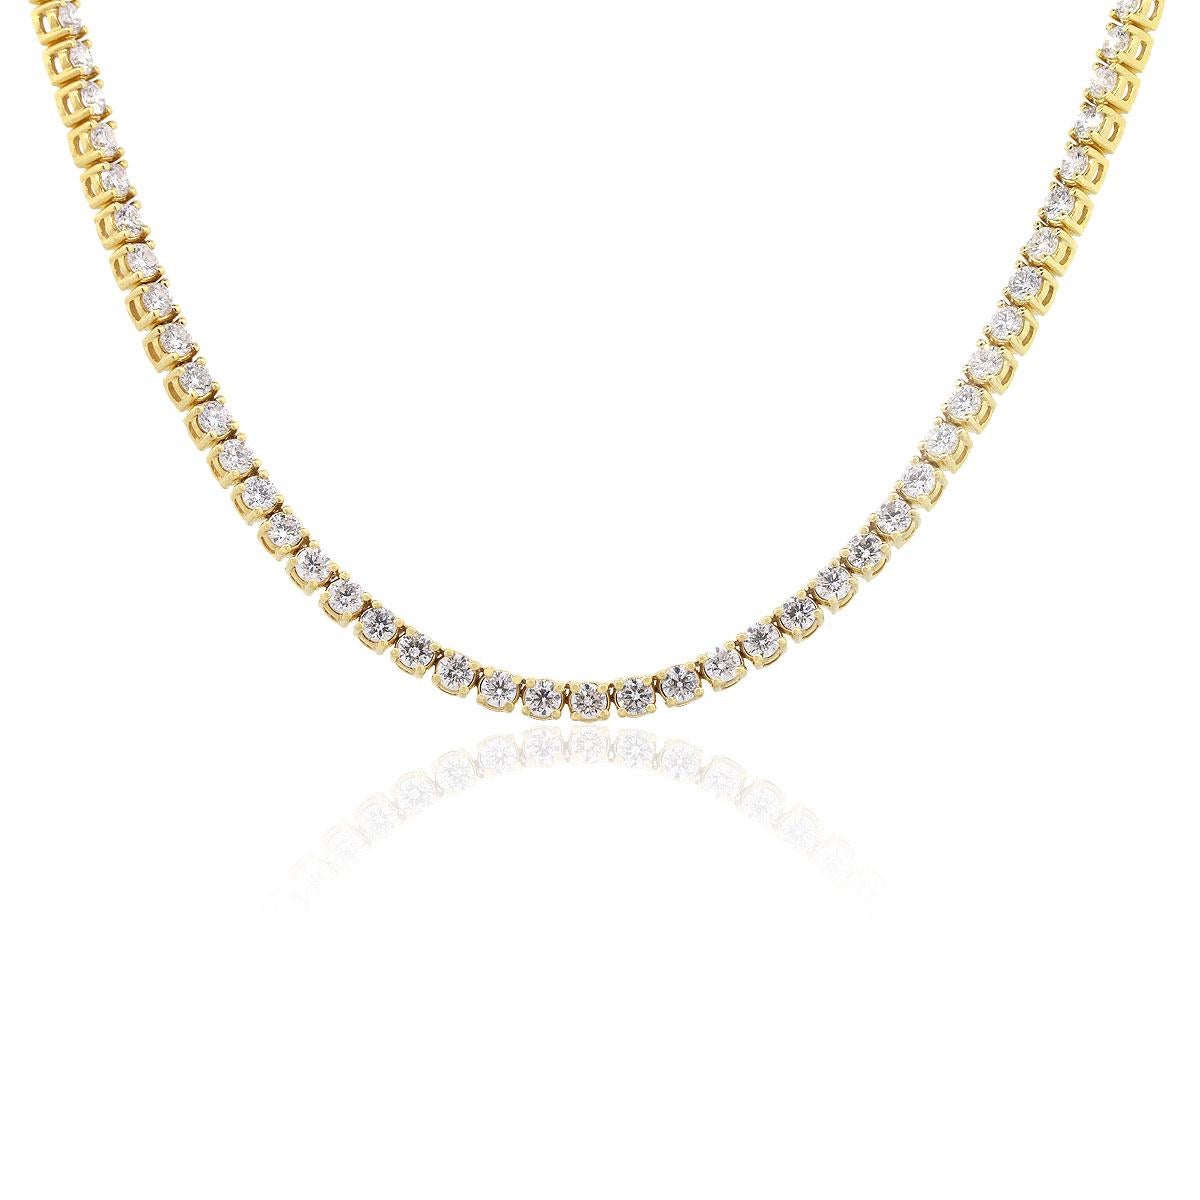 Material: 14k Yellow Gold
Diamond Details: 146 stones, approx. 30.77ctw of round brilliant diamonds. Diamonds are G/H in color and SI in clarity
Measurements: Necklace measures 24″ in length.
Fastening: Tongue in box clasp with safety latch
Item